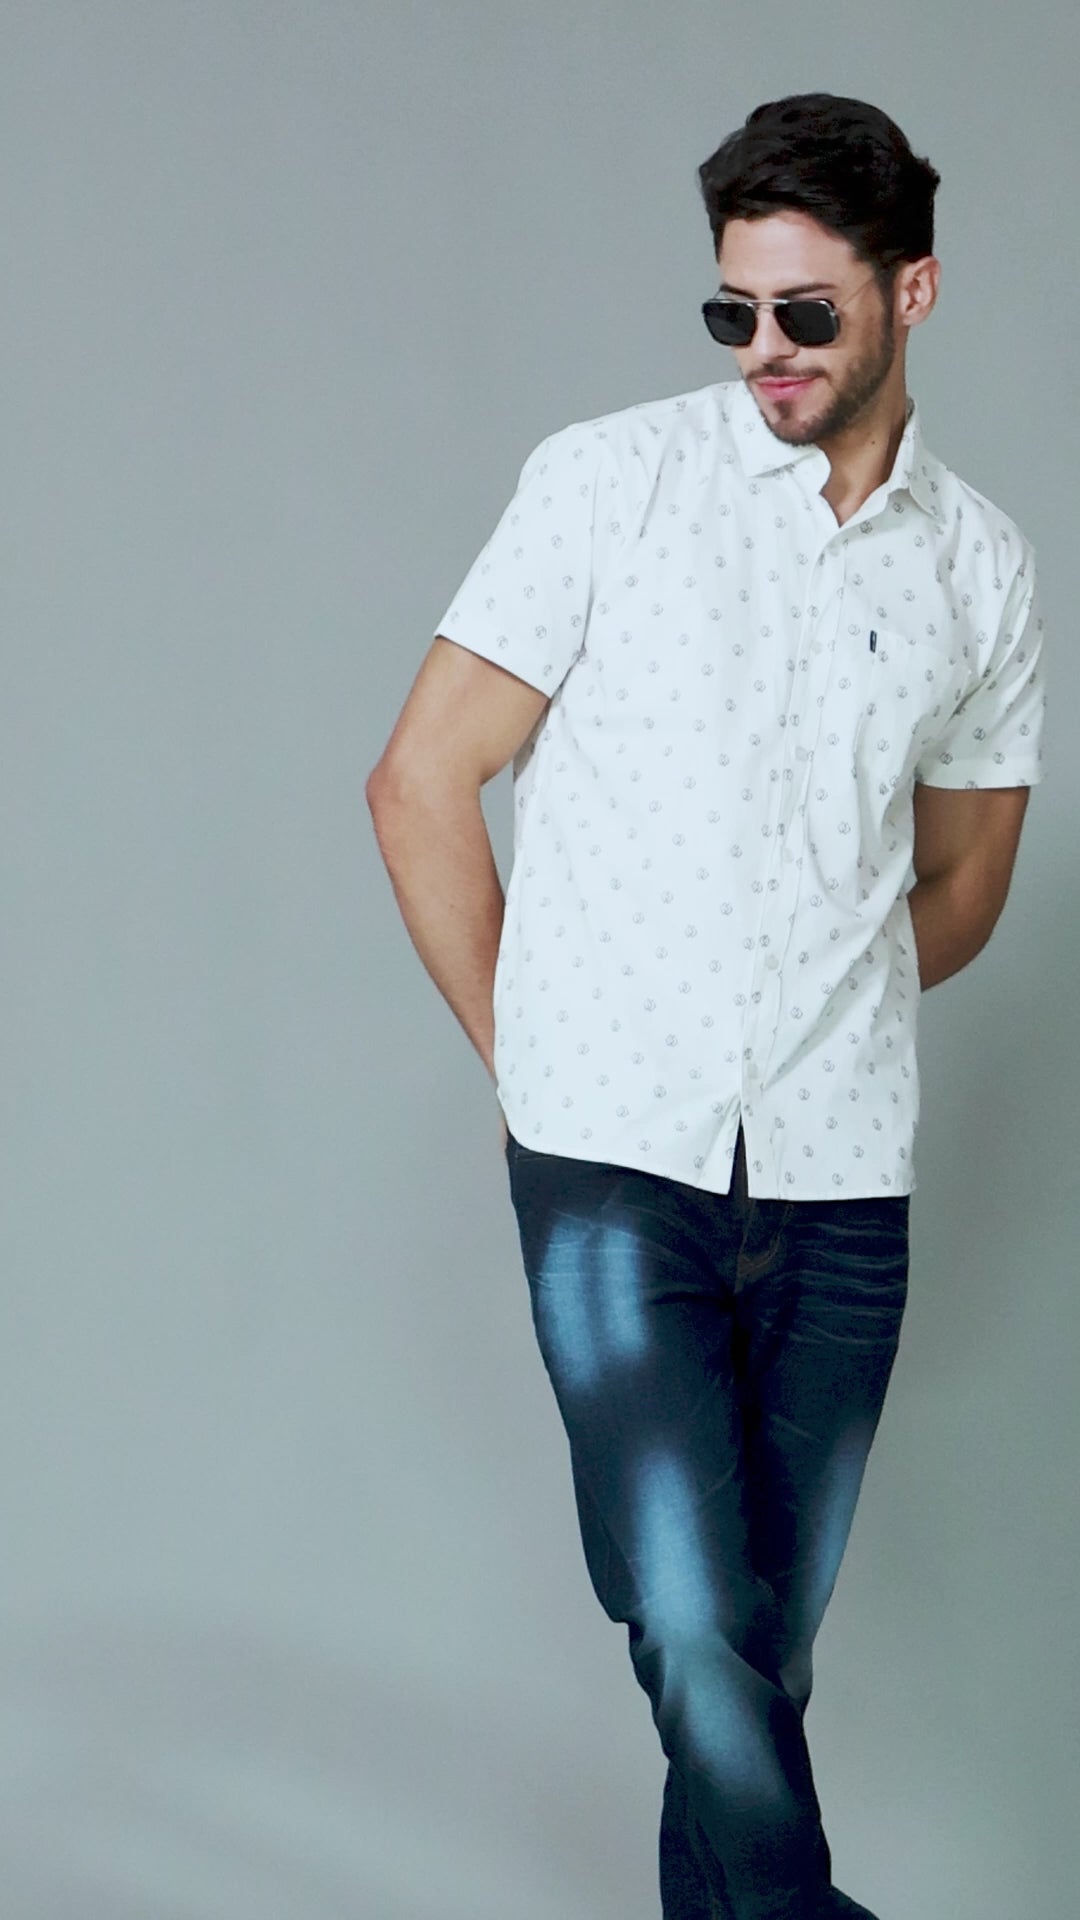 Regular Fit Pure Cotton White Printed Casual Shirt For Men